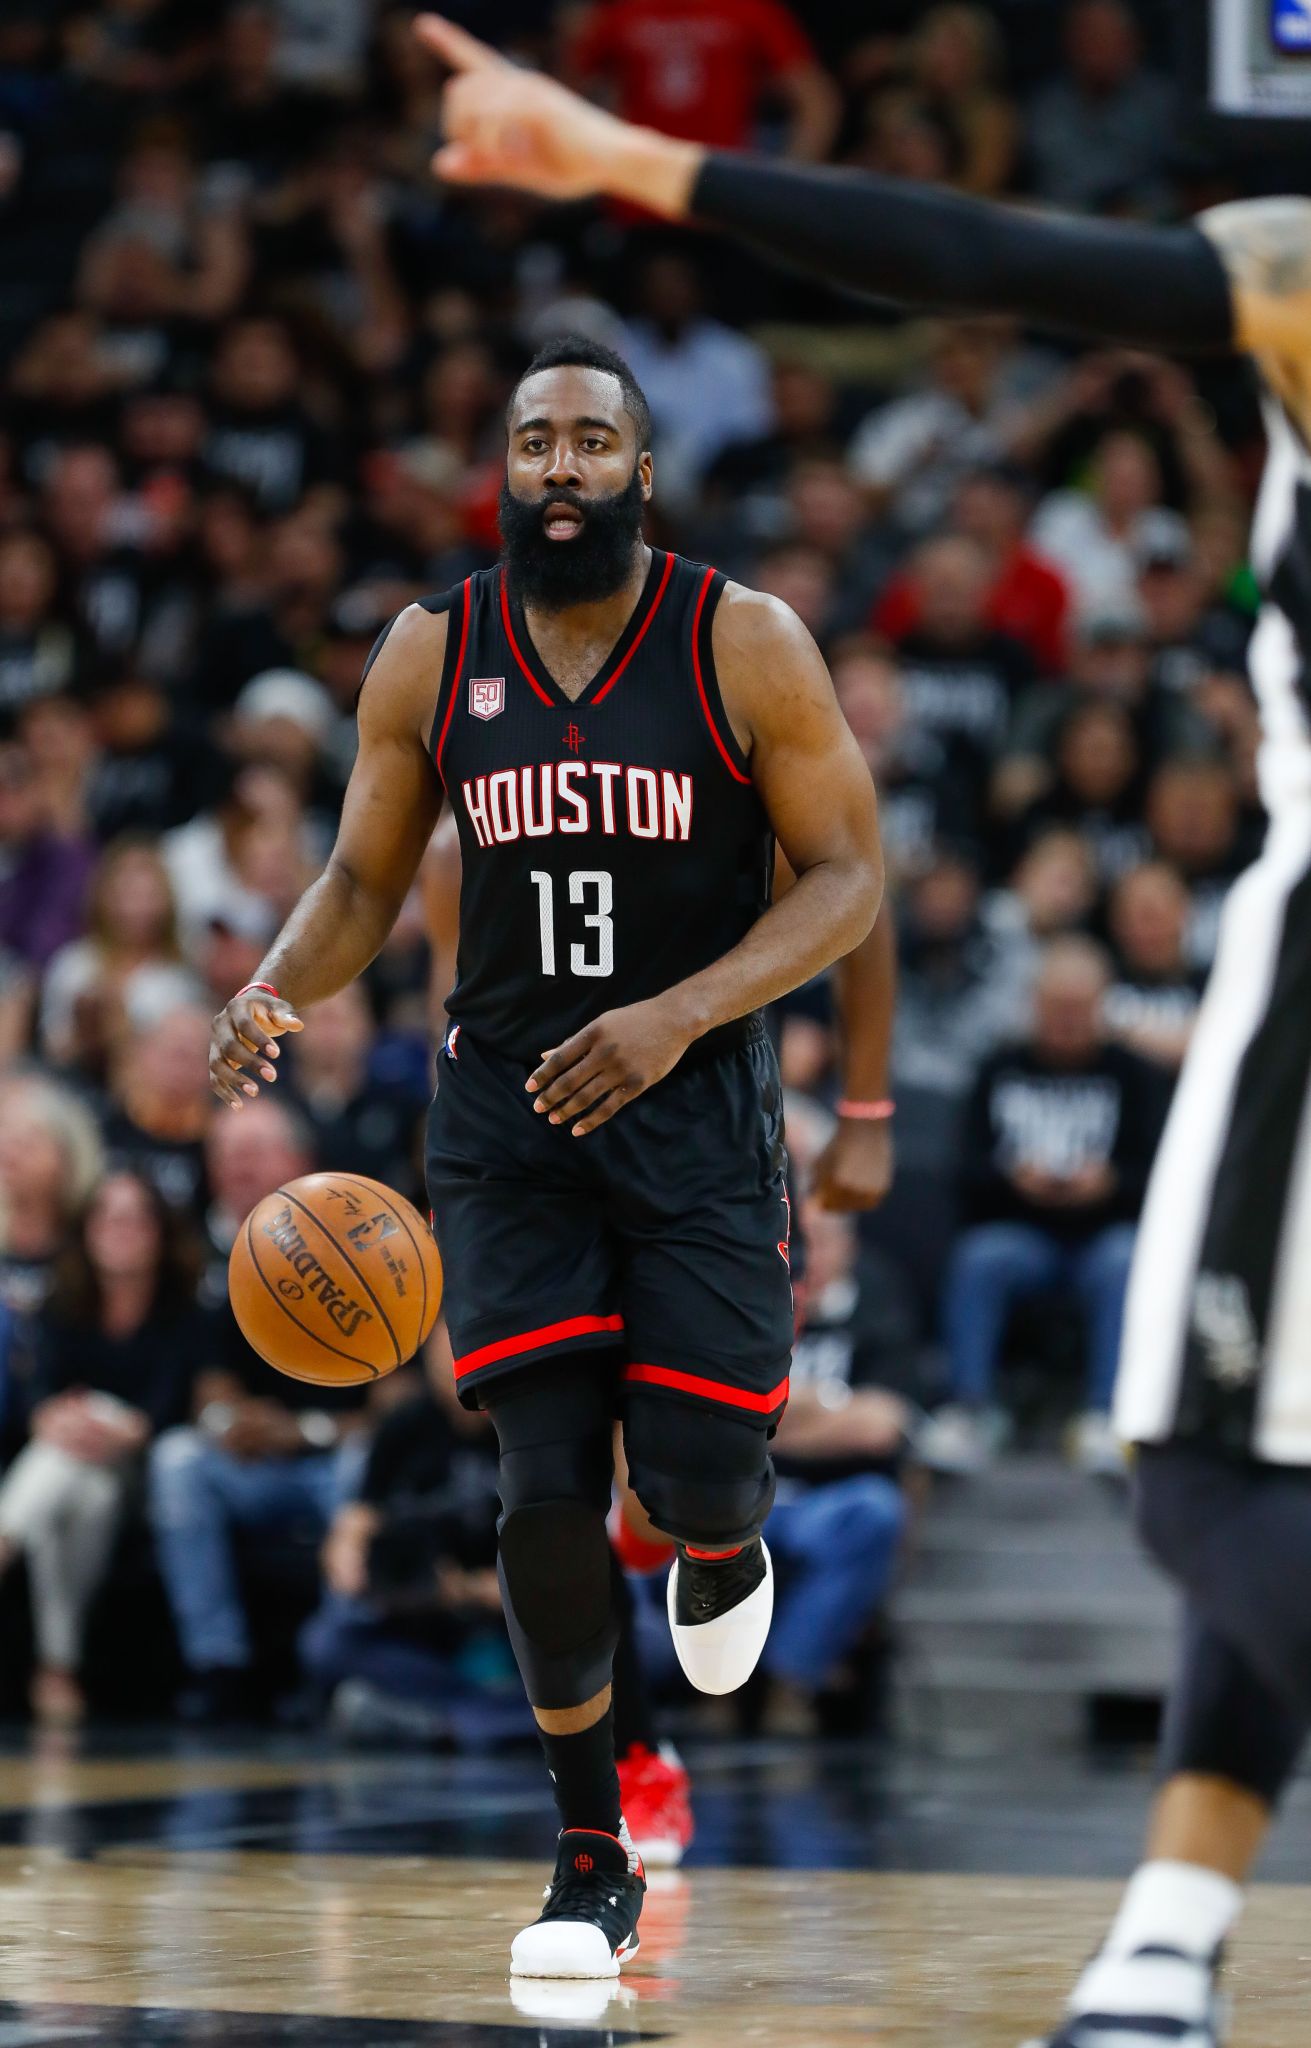 James Harden wants Rockets to 'get greedy' after Game 1 rout